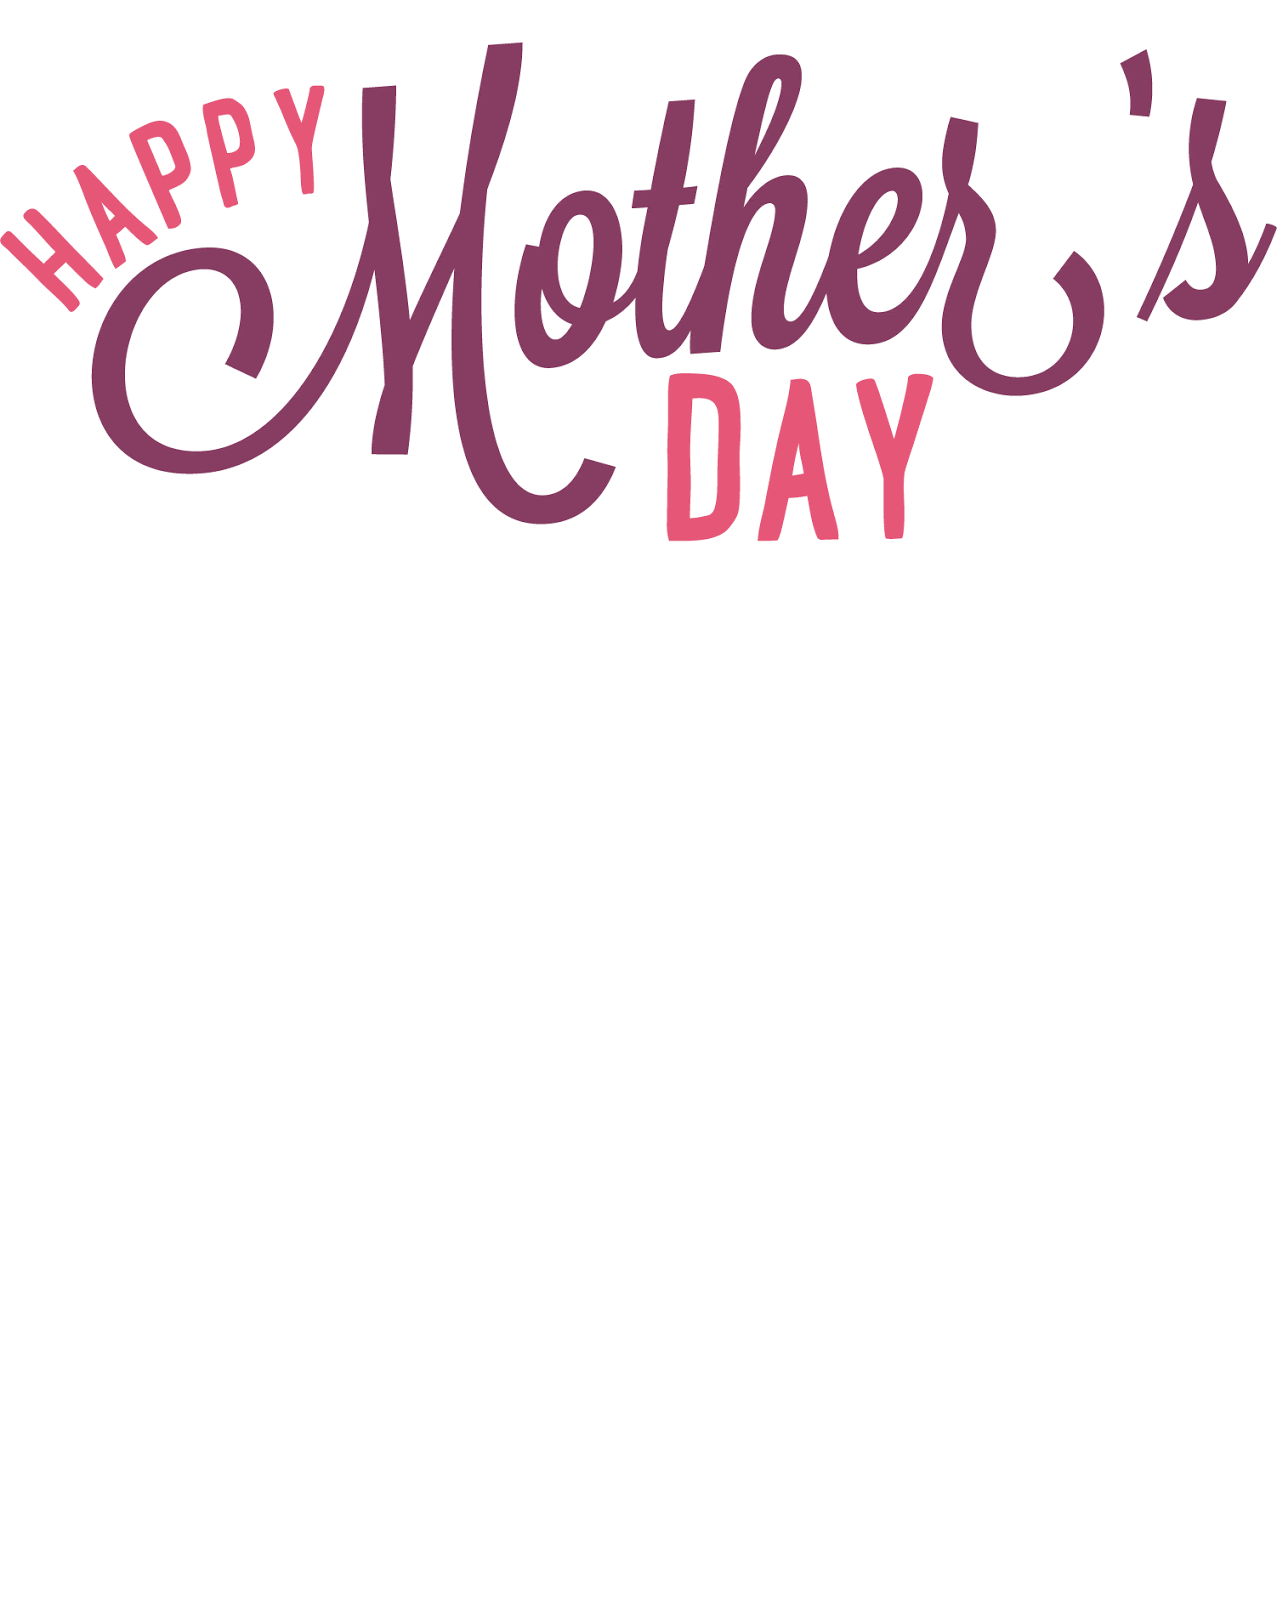 Happy mothers day animated Glittering gif clipart graphic 3d.